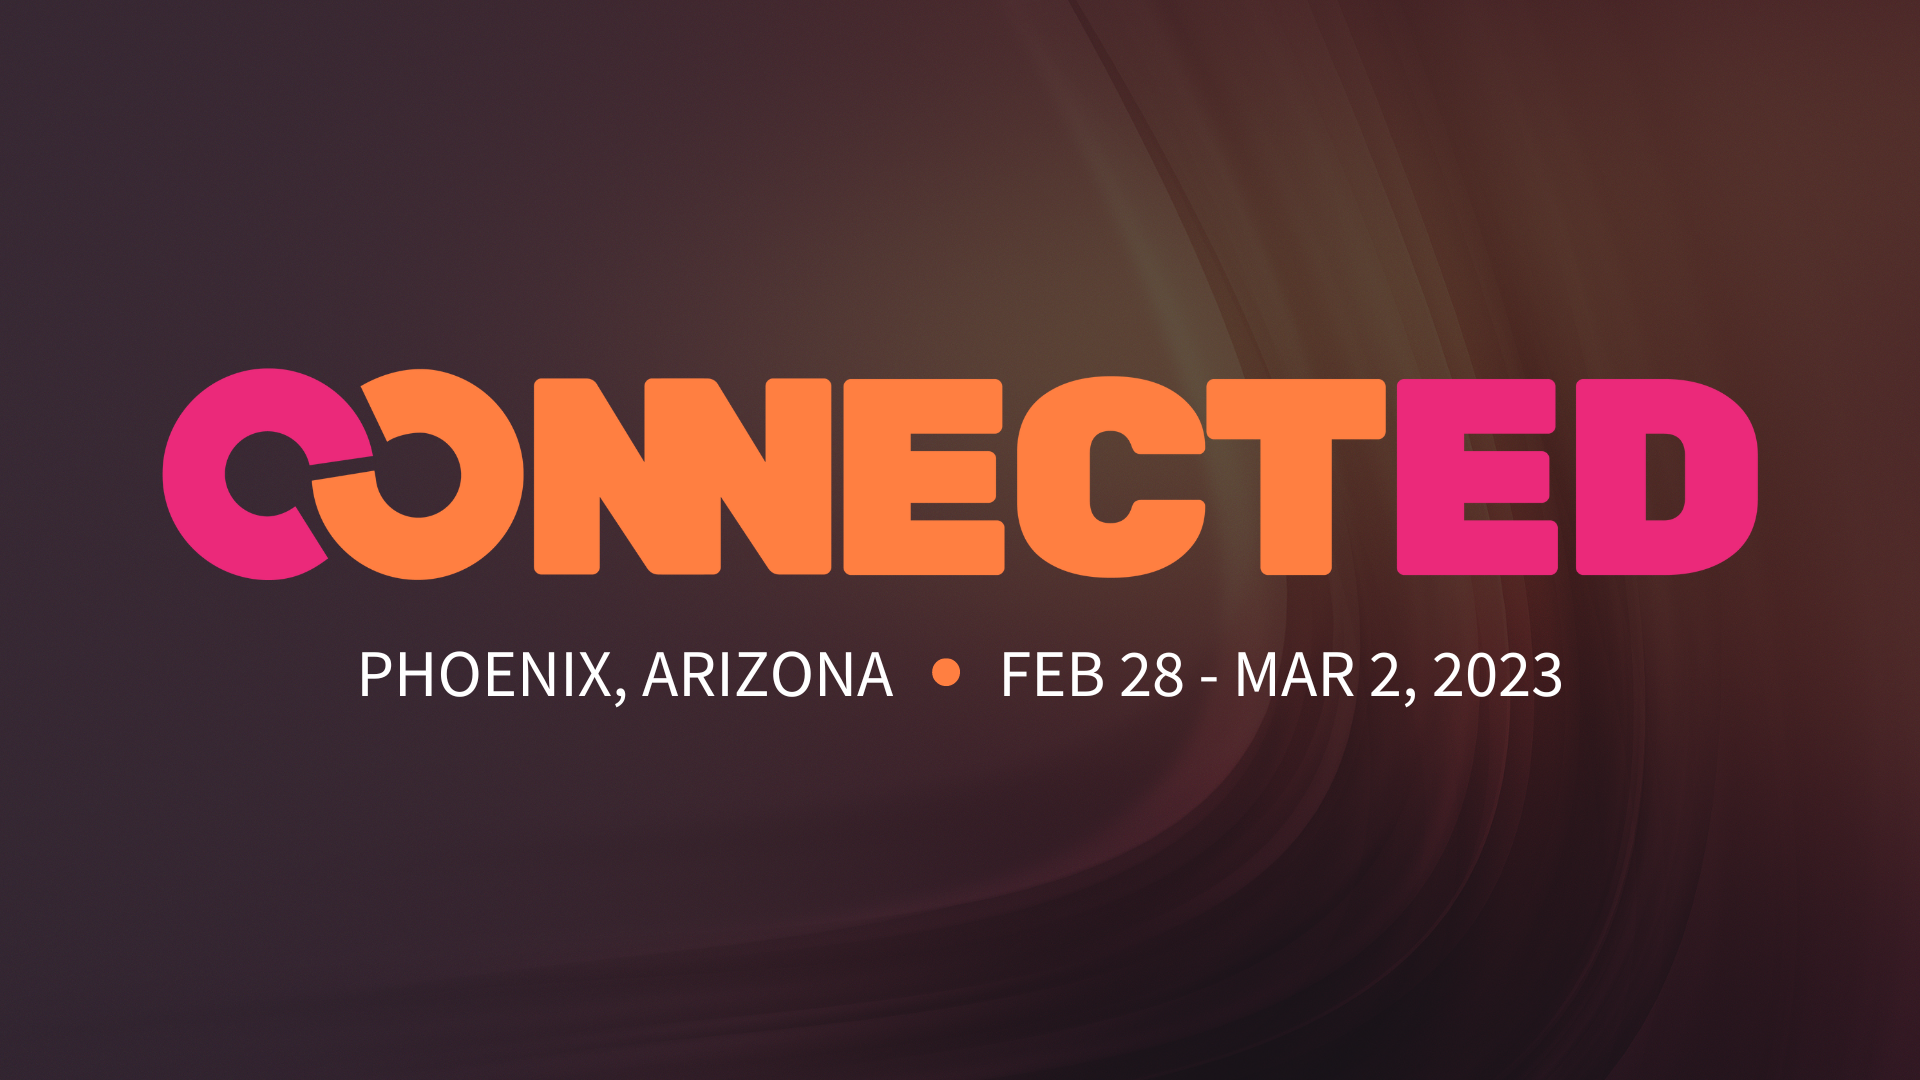 Open LMS to Host Inaugural In-Person eLearning Event in Phoenix